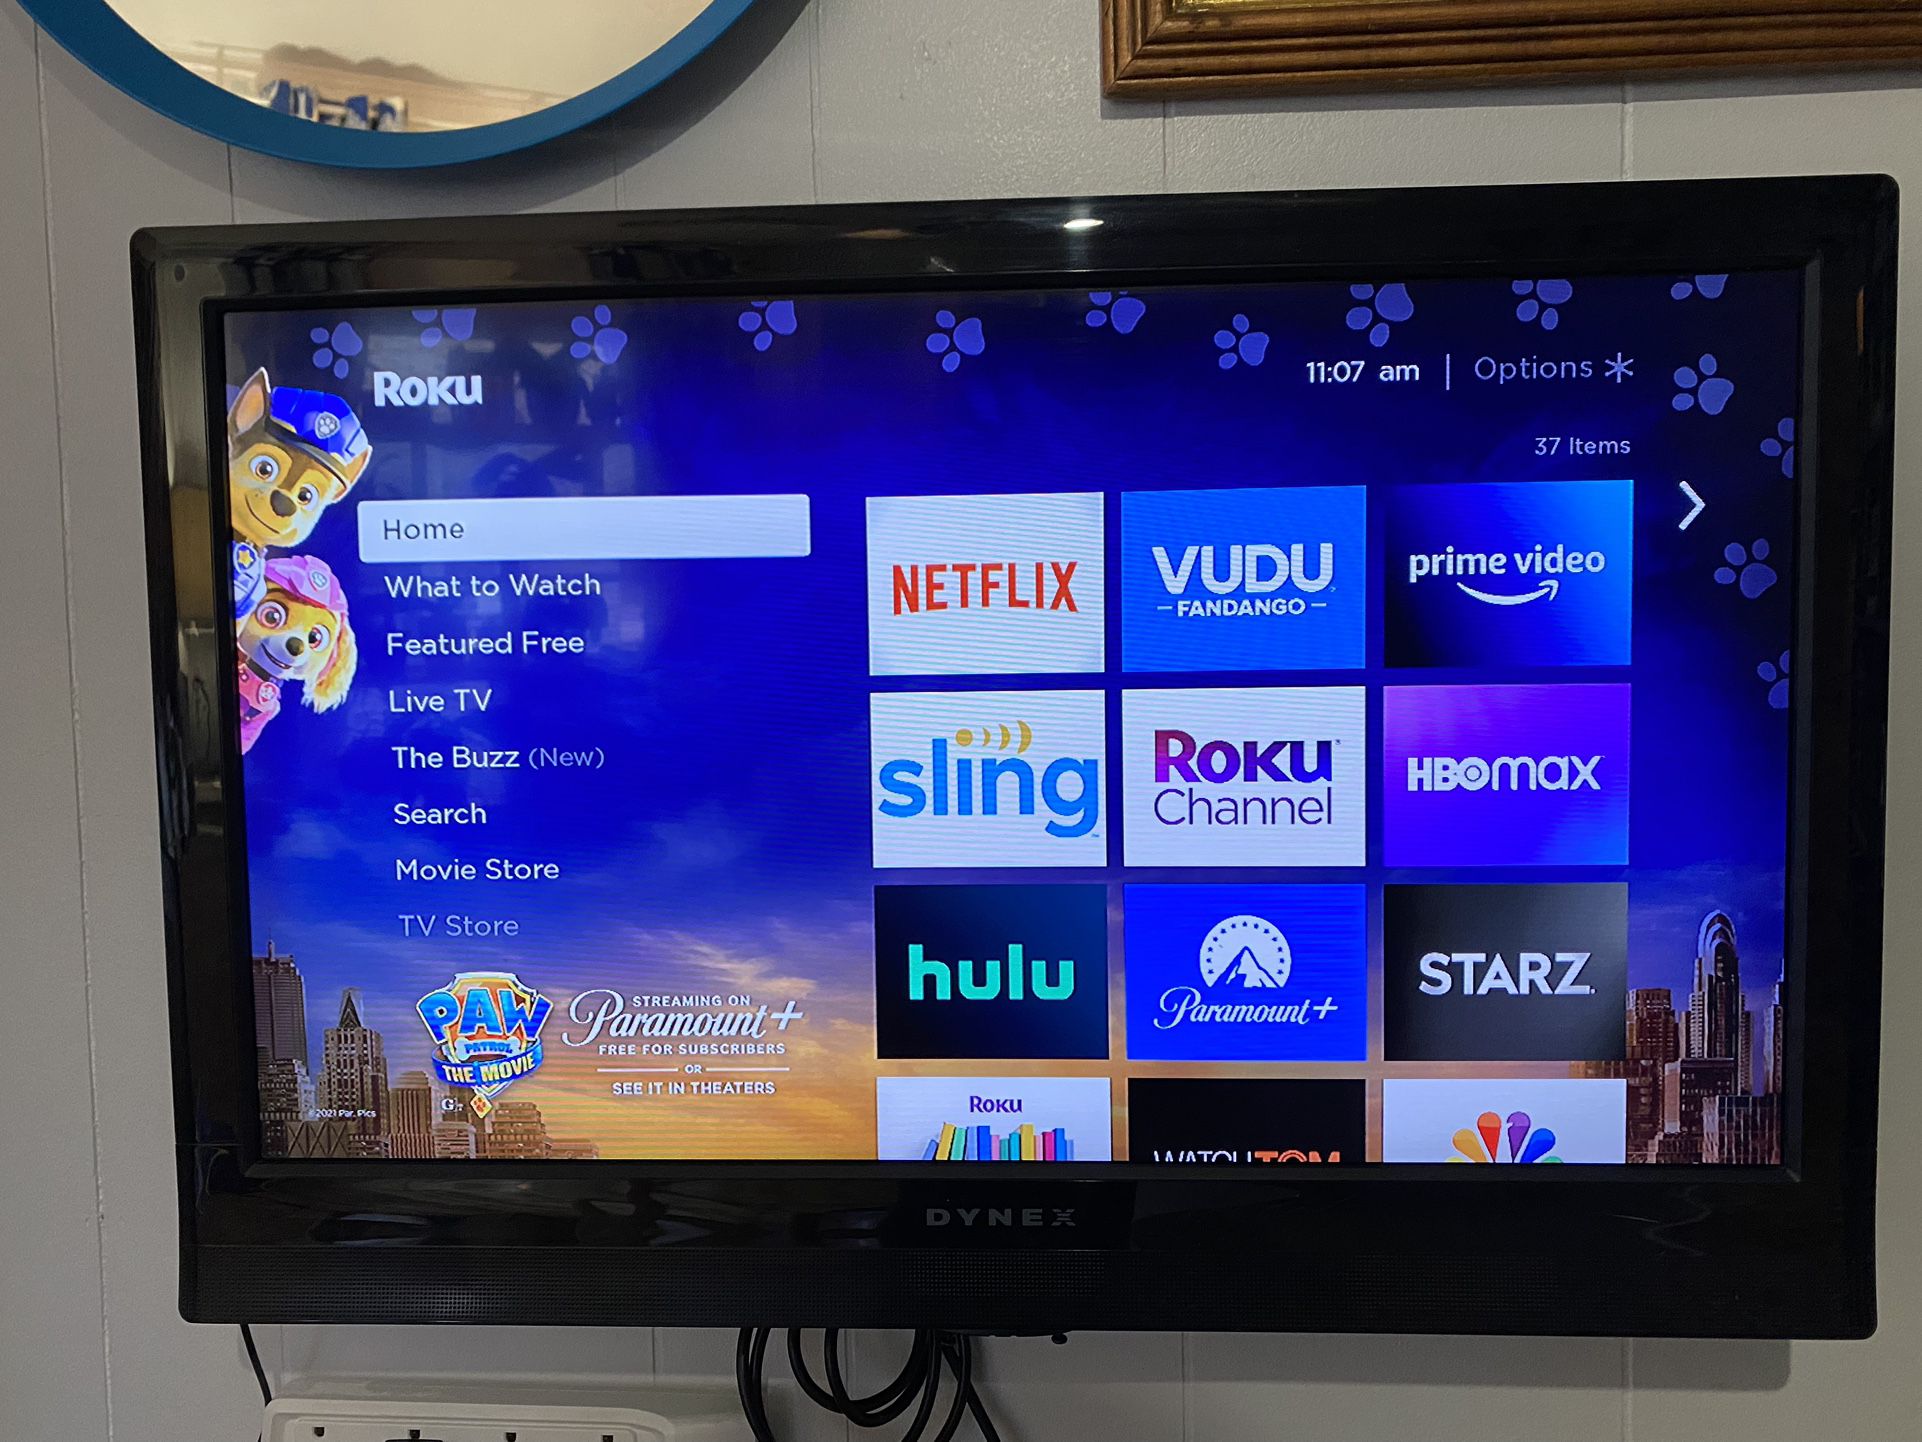 TV(Dynex)36inches (not a Smart TV), Roku Streaming Stick, Sony DVD Player (all have Remote Controls)